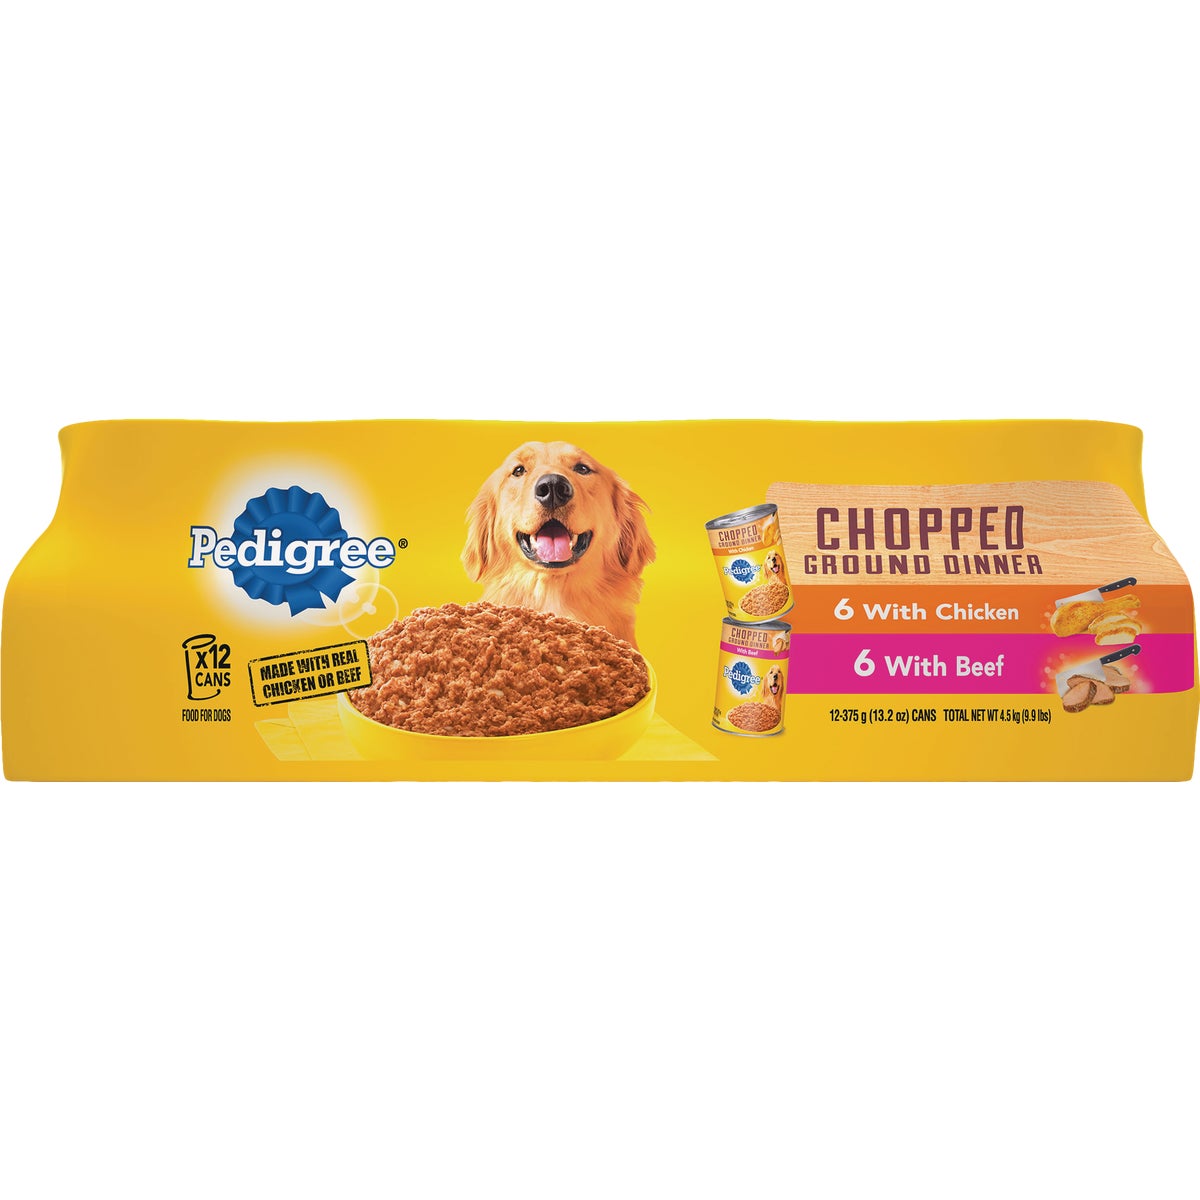 Pedigree Traditional Chopped Ground Dinner Chicken/Beef Variety Wet Dog Food (12-Pack)